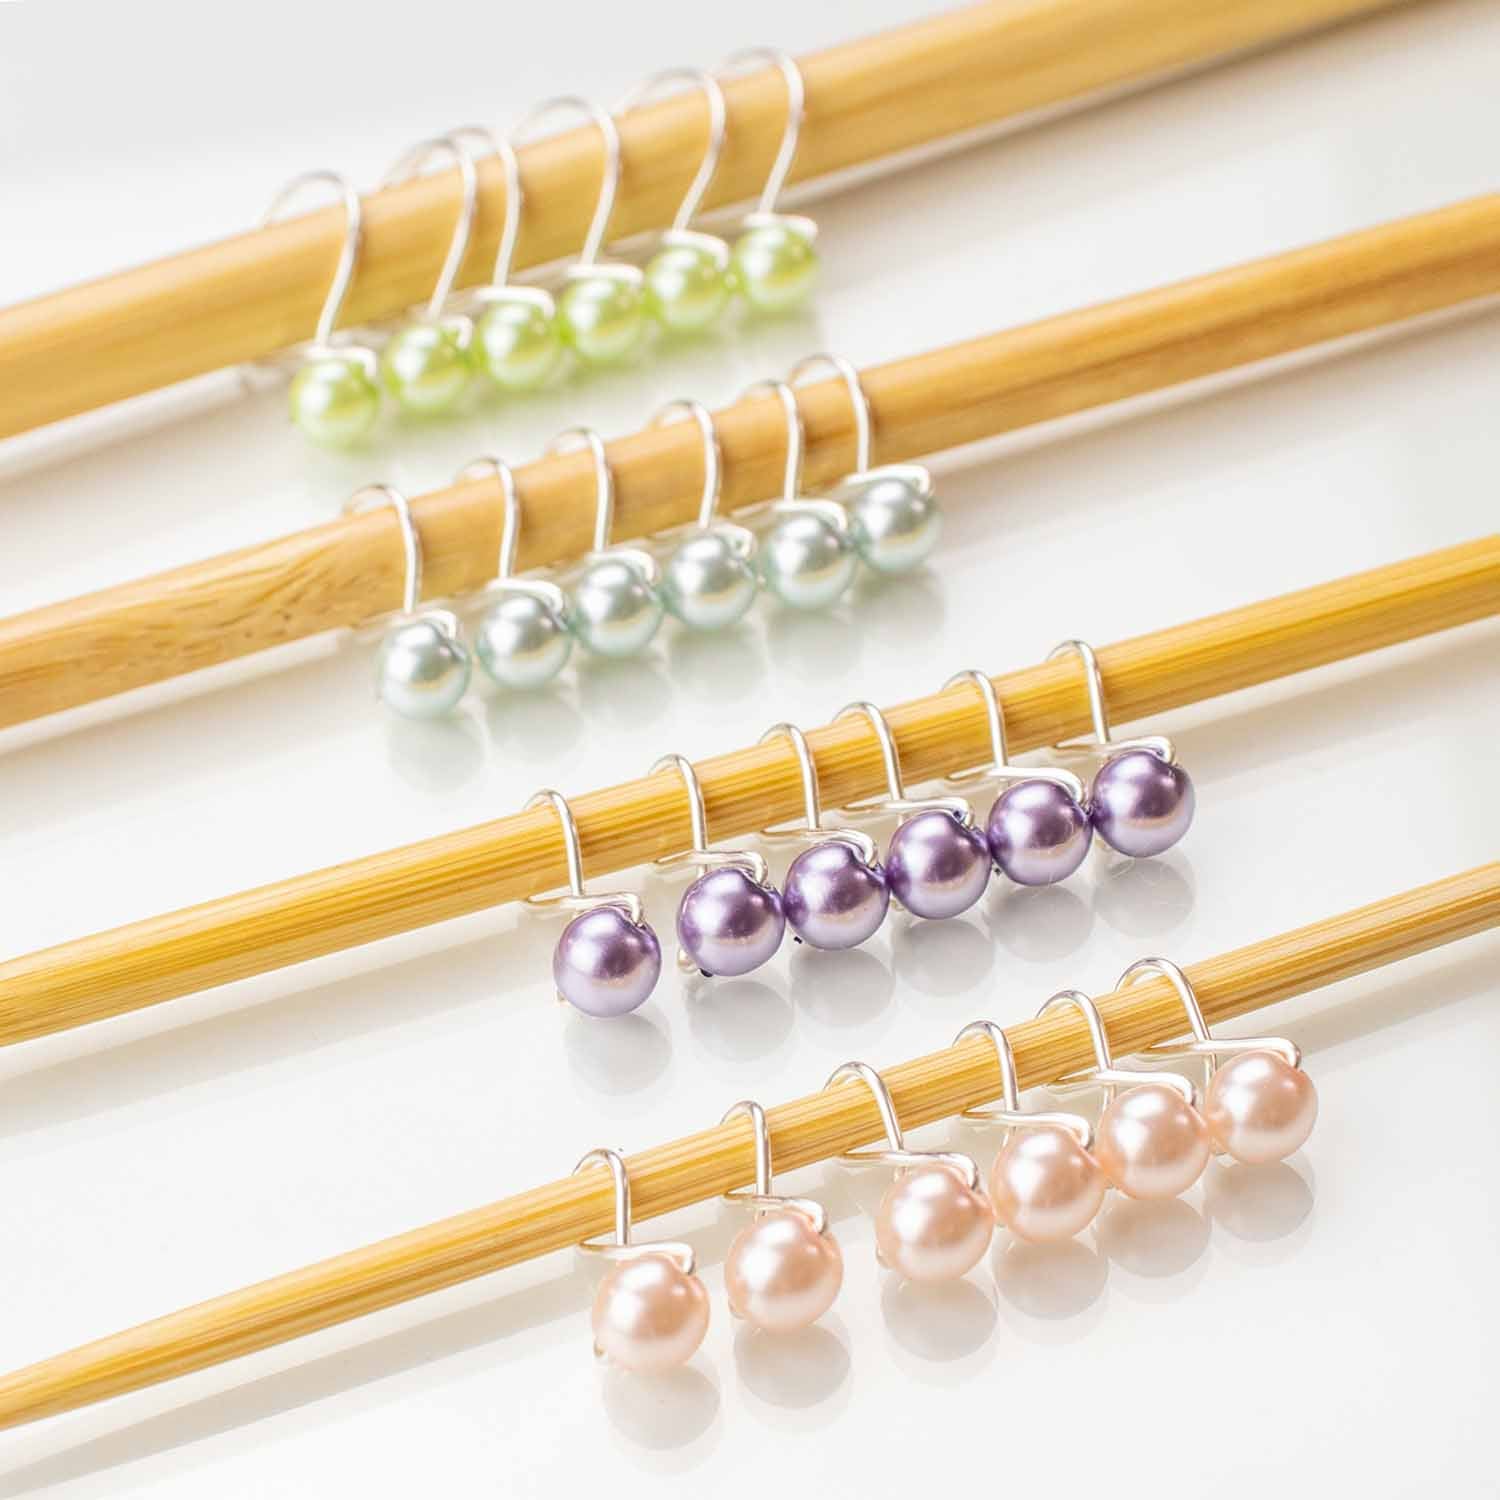 Stitch Markers - closed style – Heavenly Yarns / Fiber of Maine